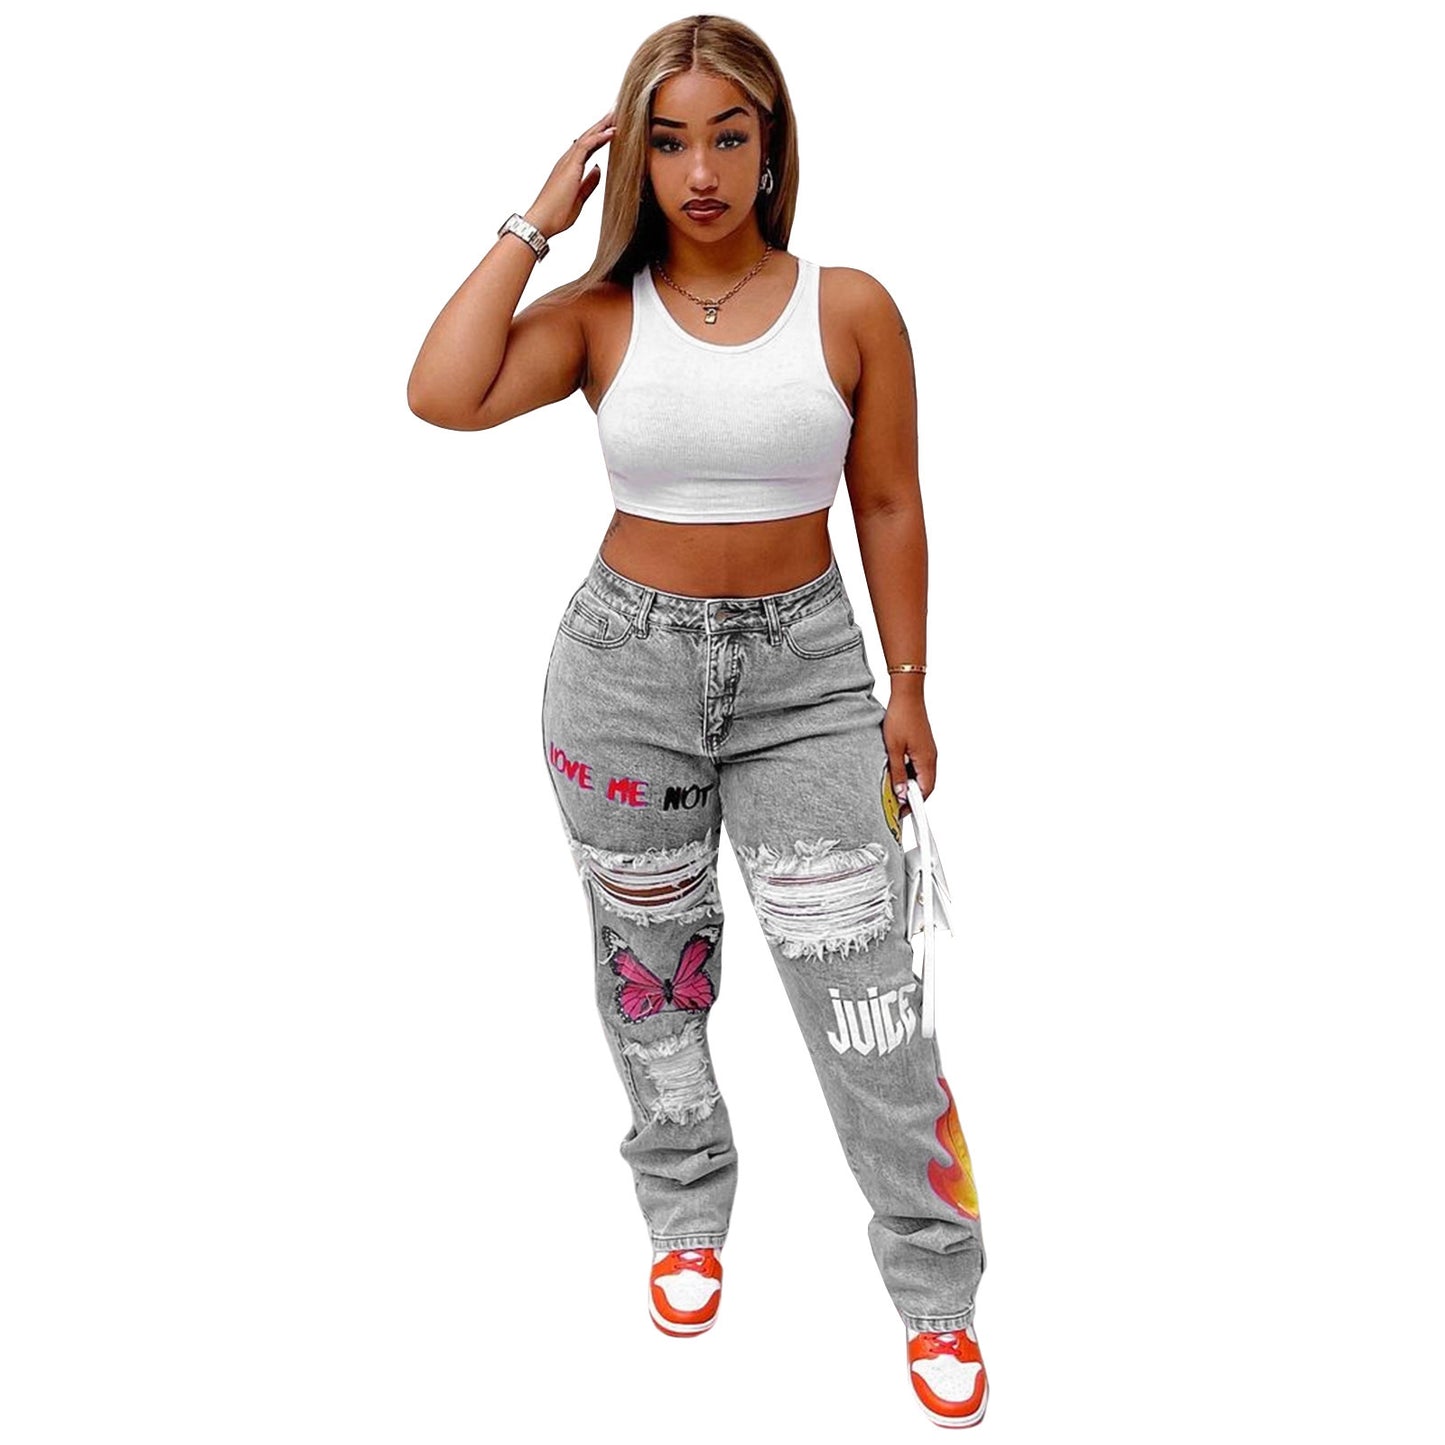 Women's Digital Positioning Print Ripped Fashion Jeans